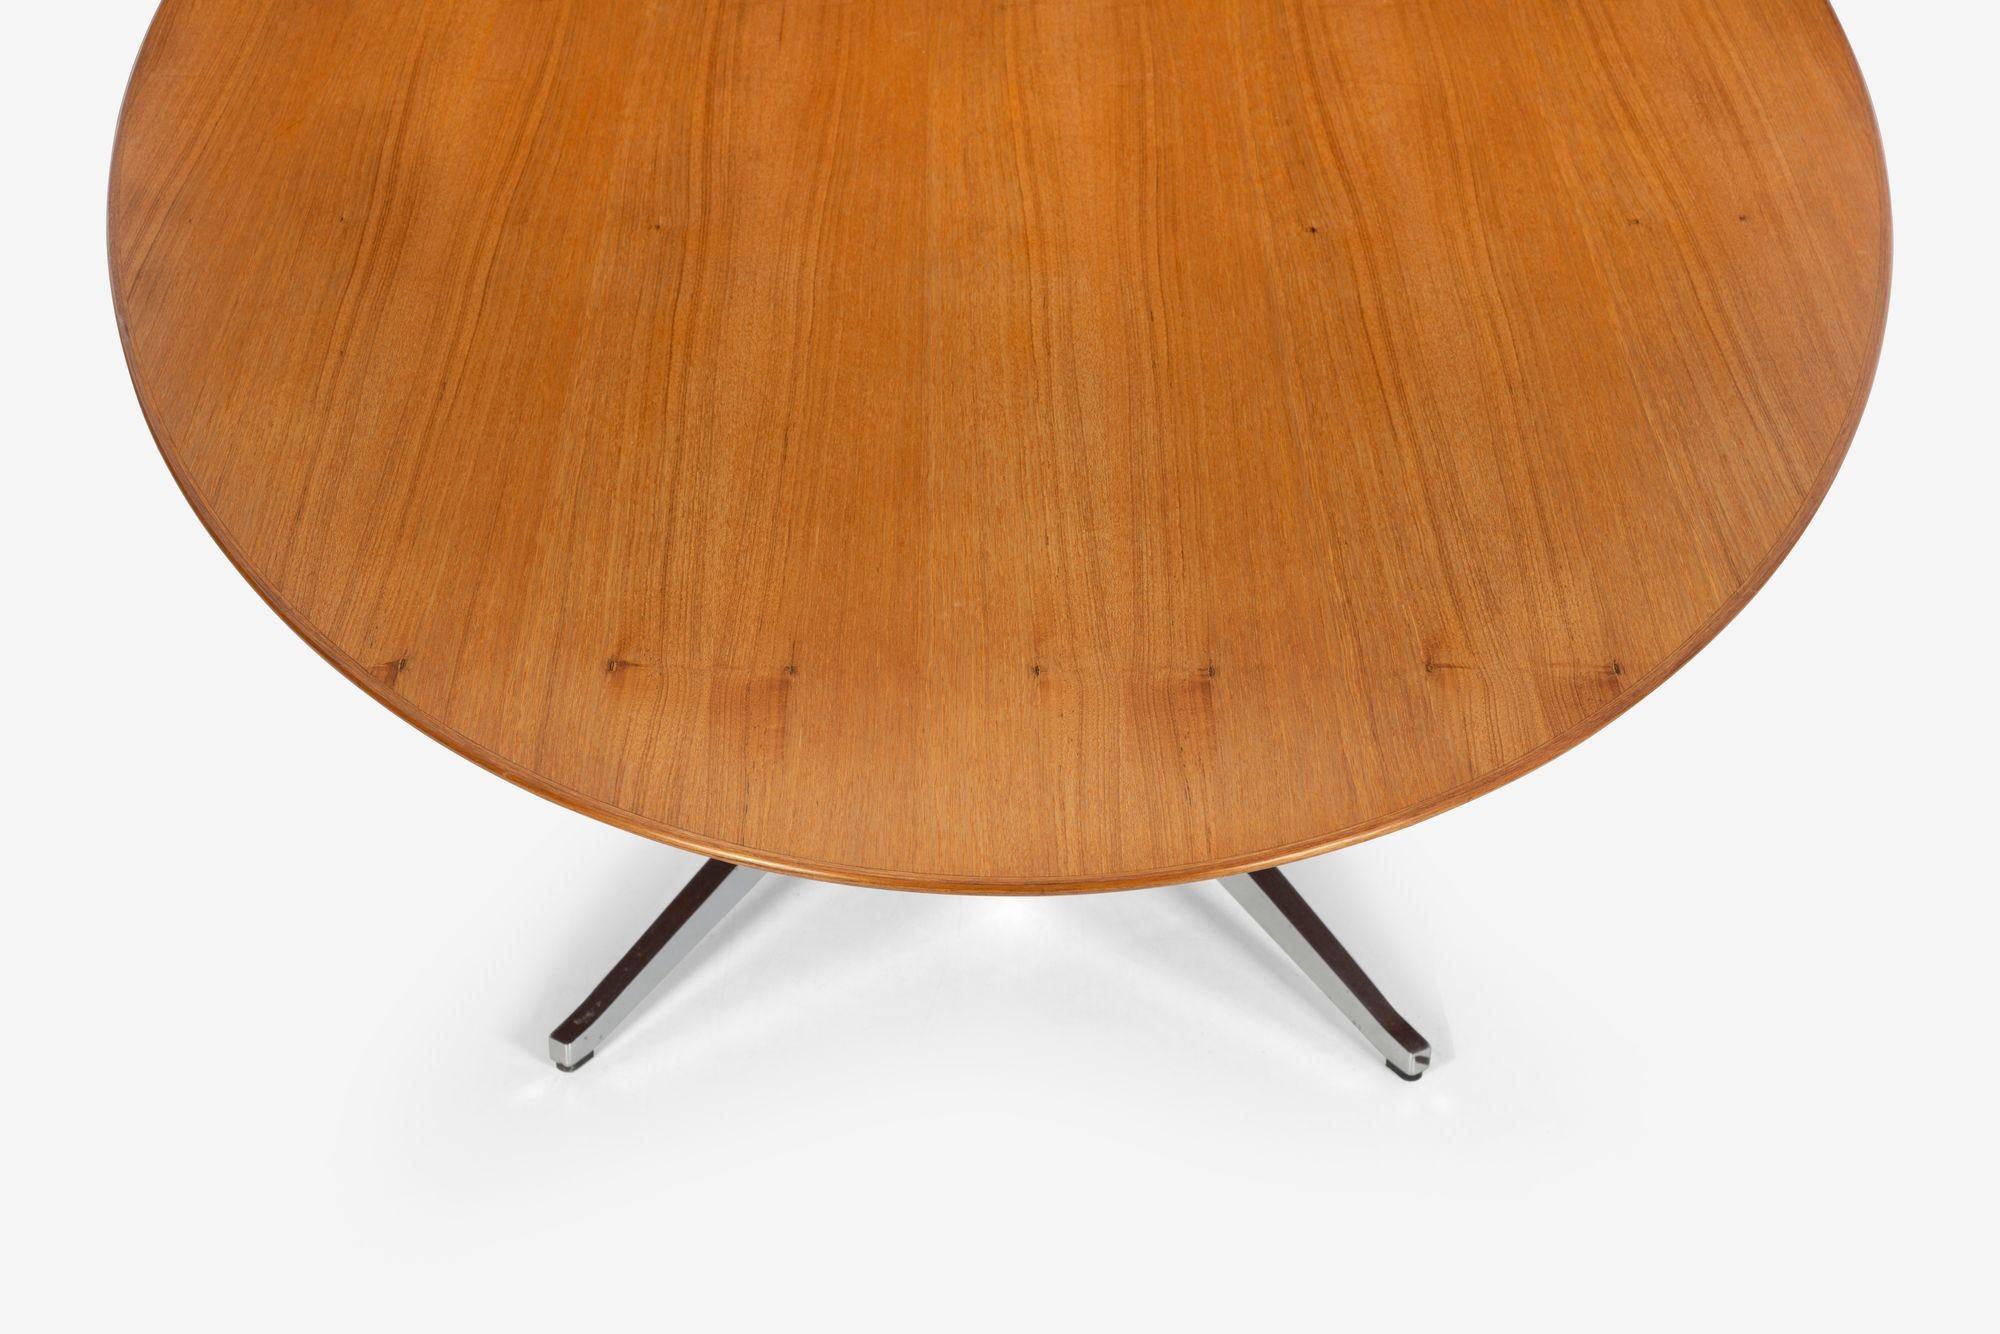 Florence Knoll Dining Table with Cherry Wood Beveled Edge Top In Good Condition For Sale In Chicago, IL